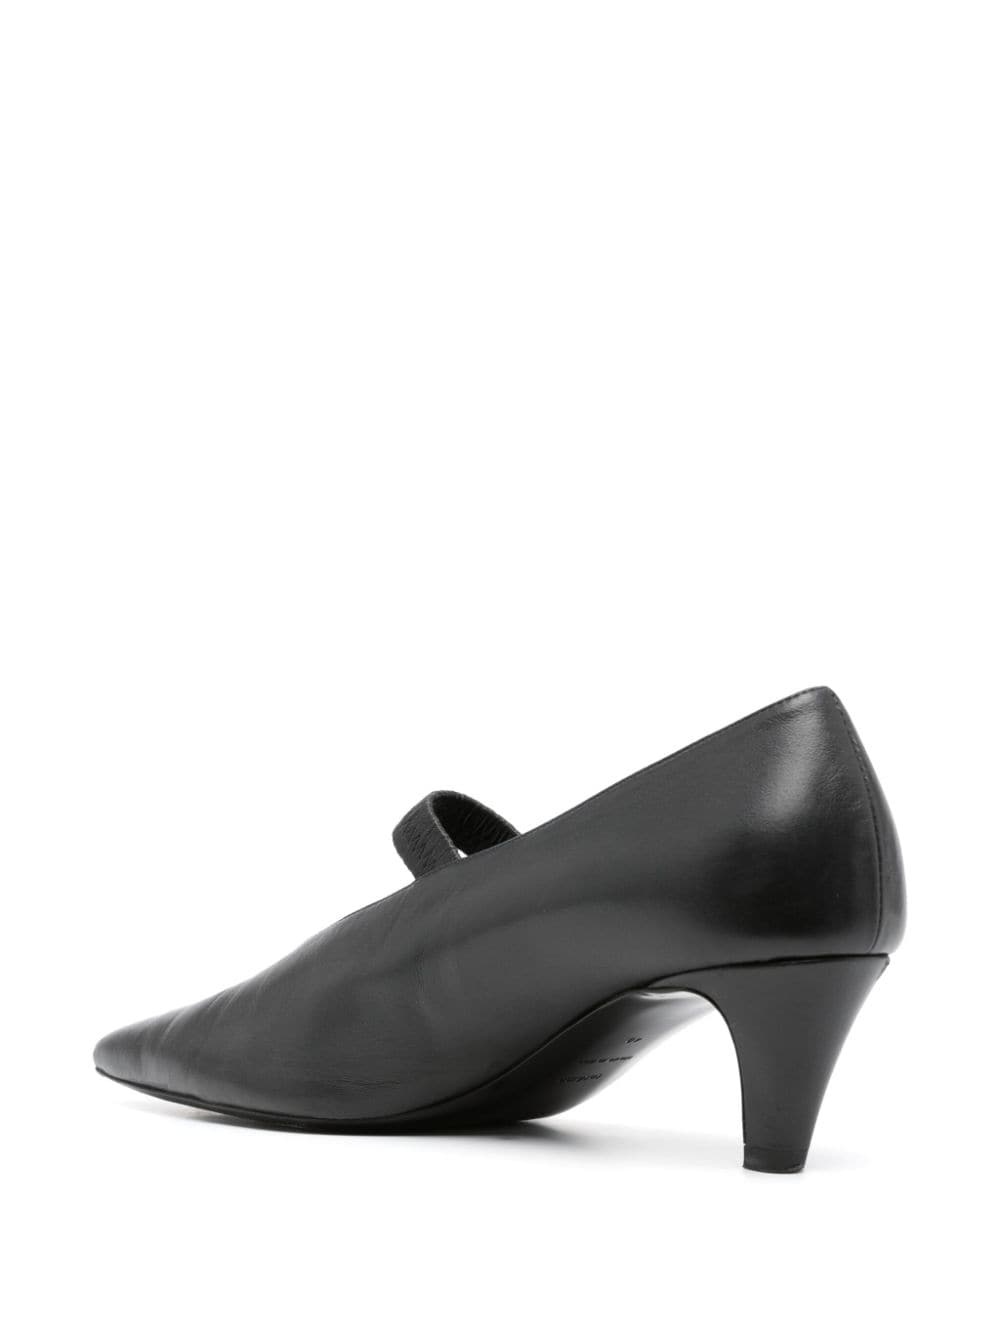 pointed toe 55mm Mary Janes - 3